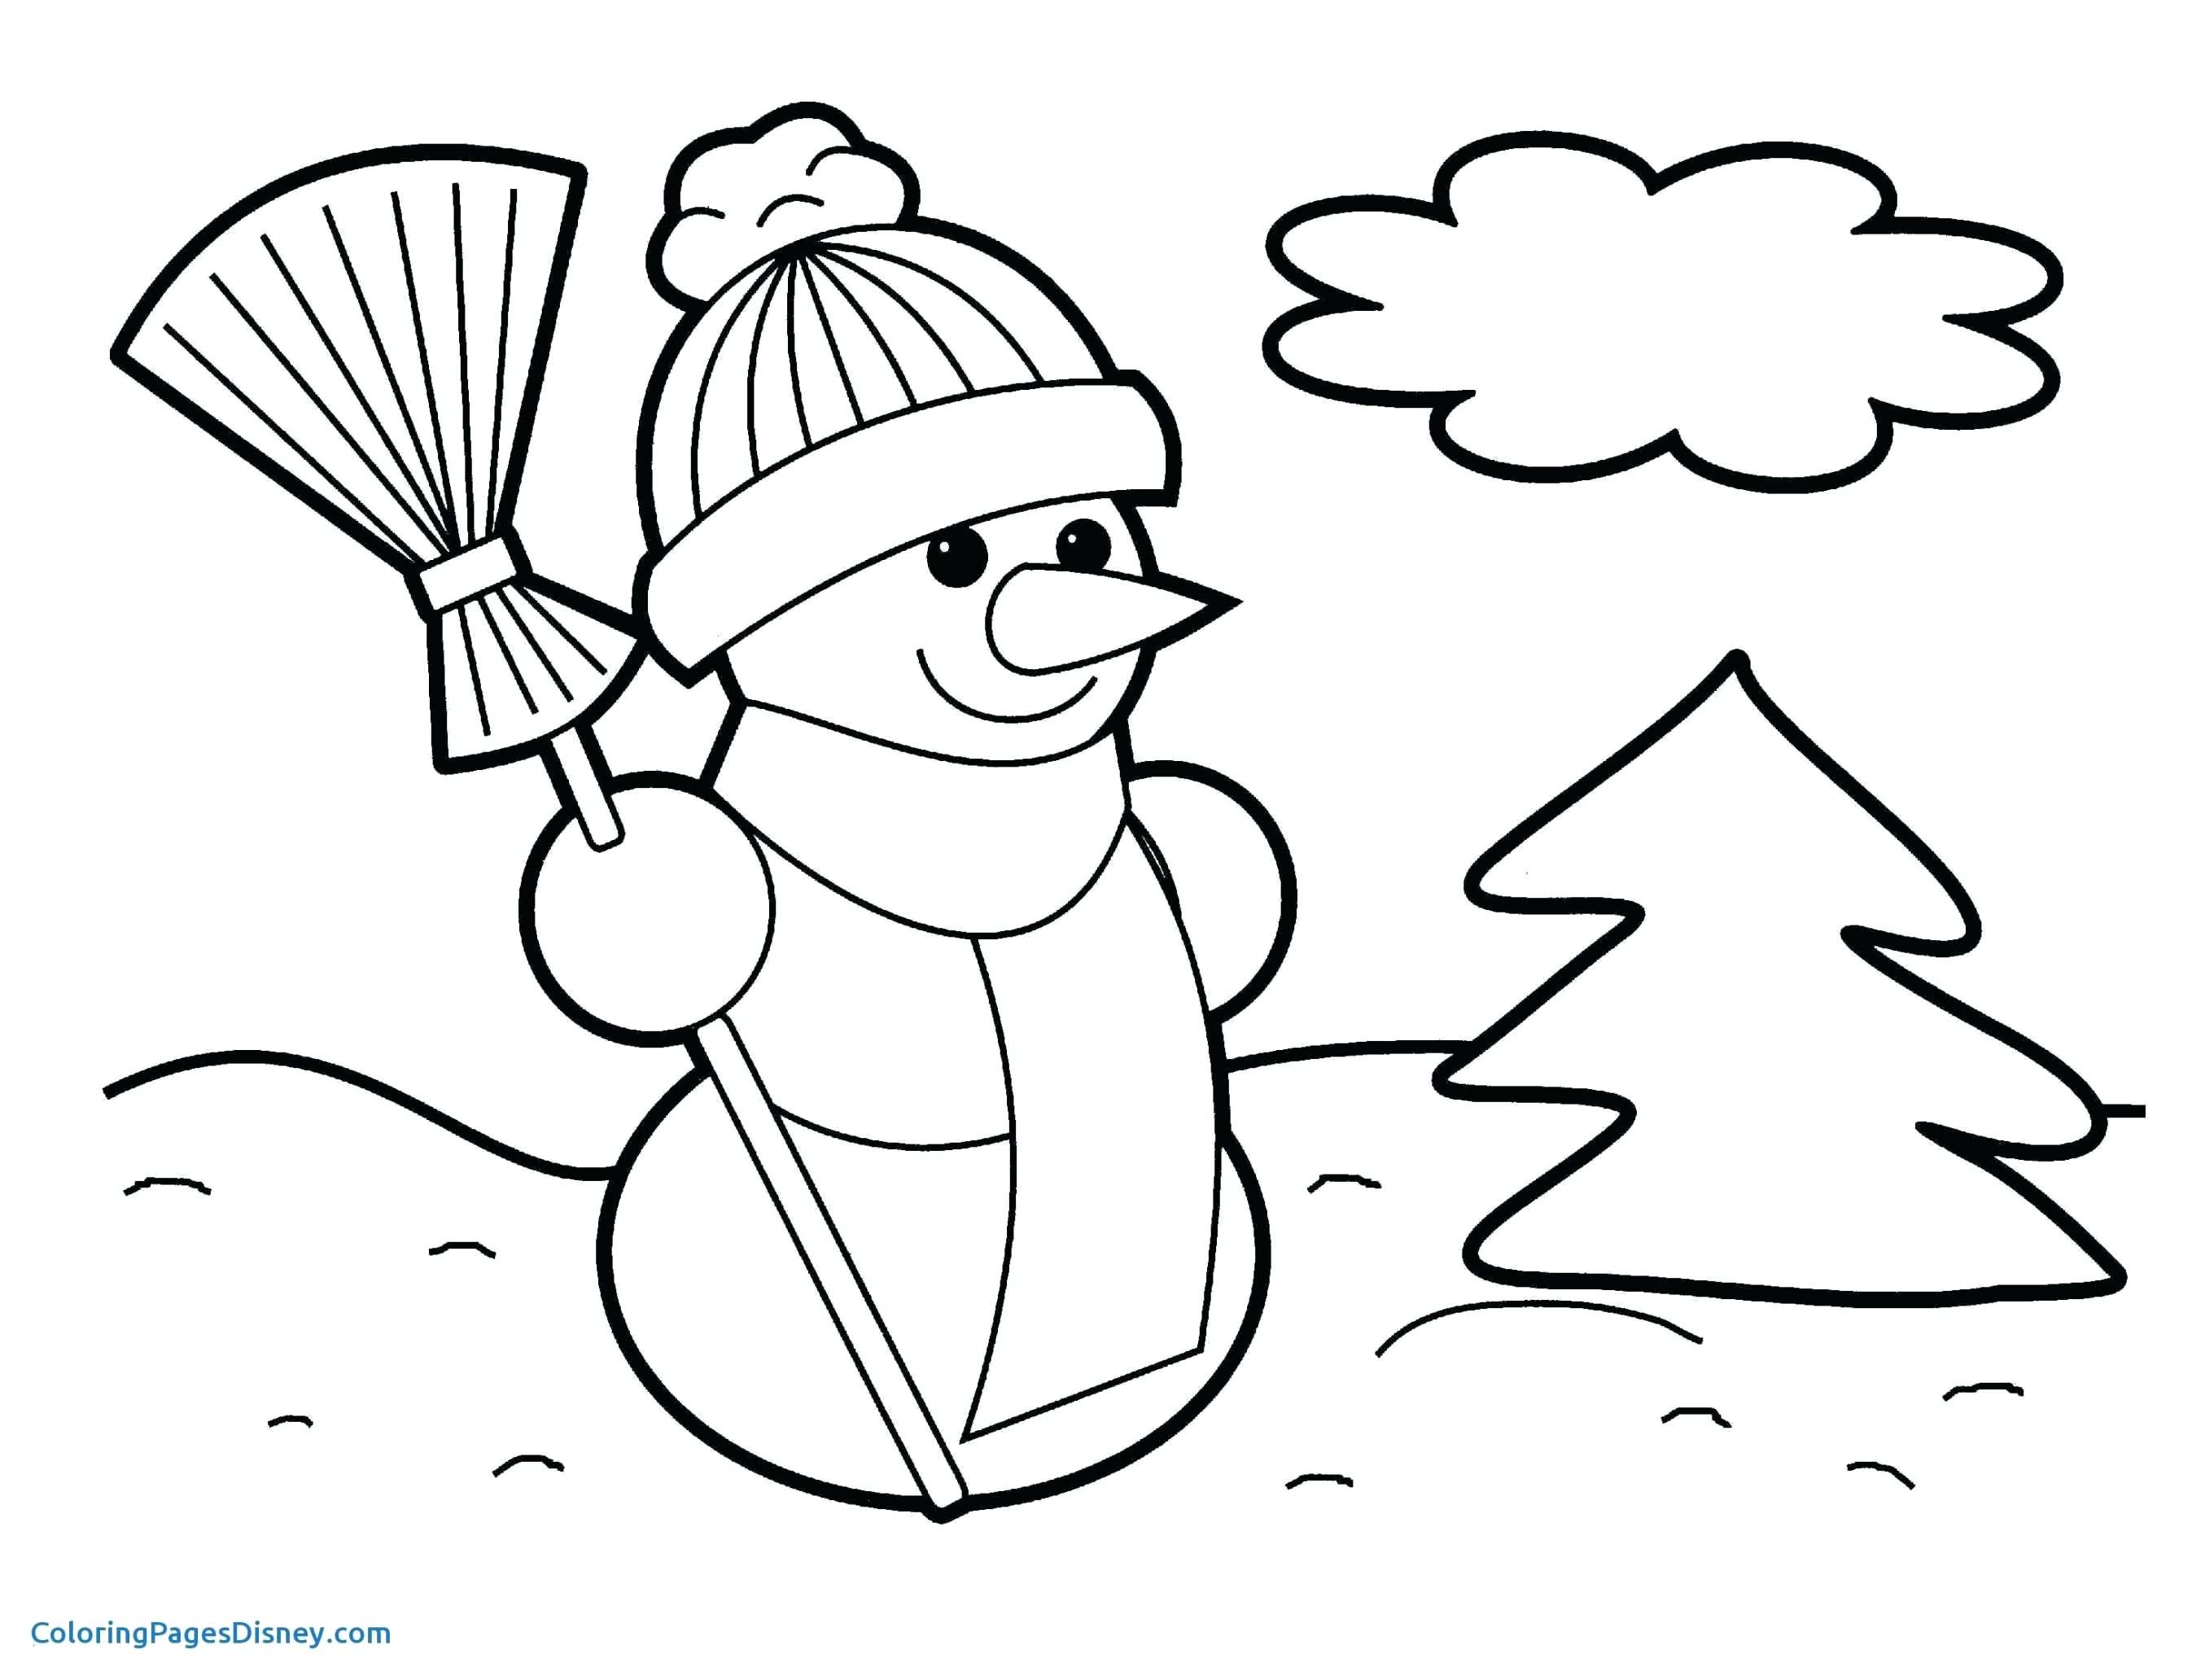 Christmas Lights Color Pages 25 Christmas Lights Coloring Page This Would Be Fun To Color